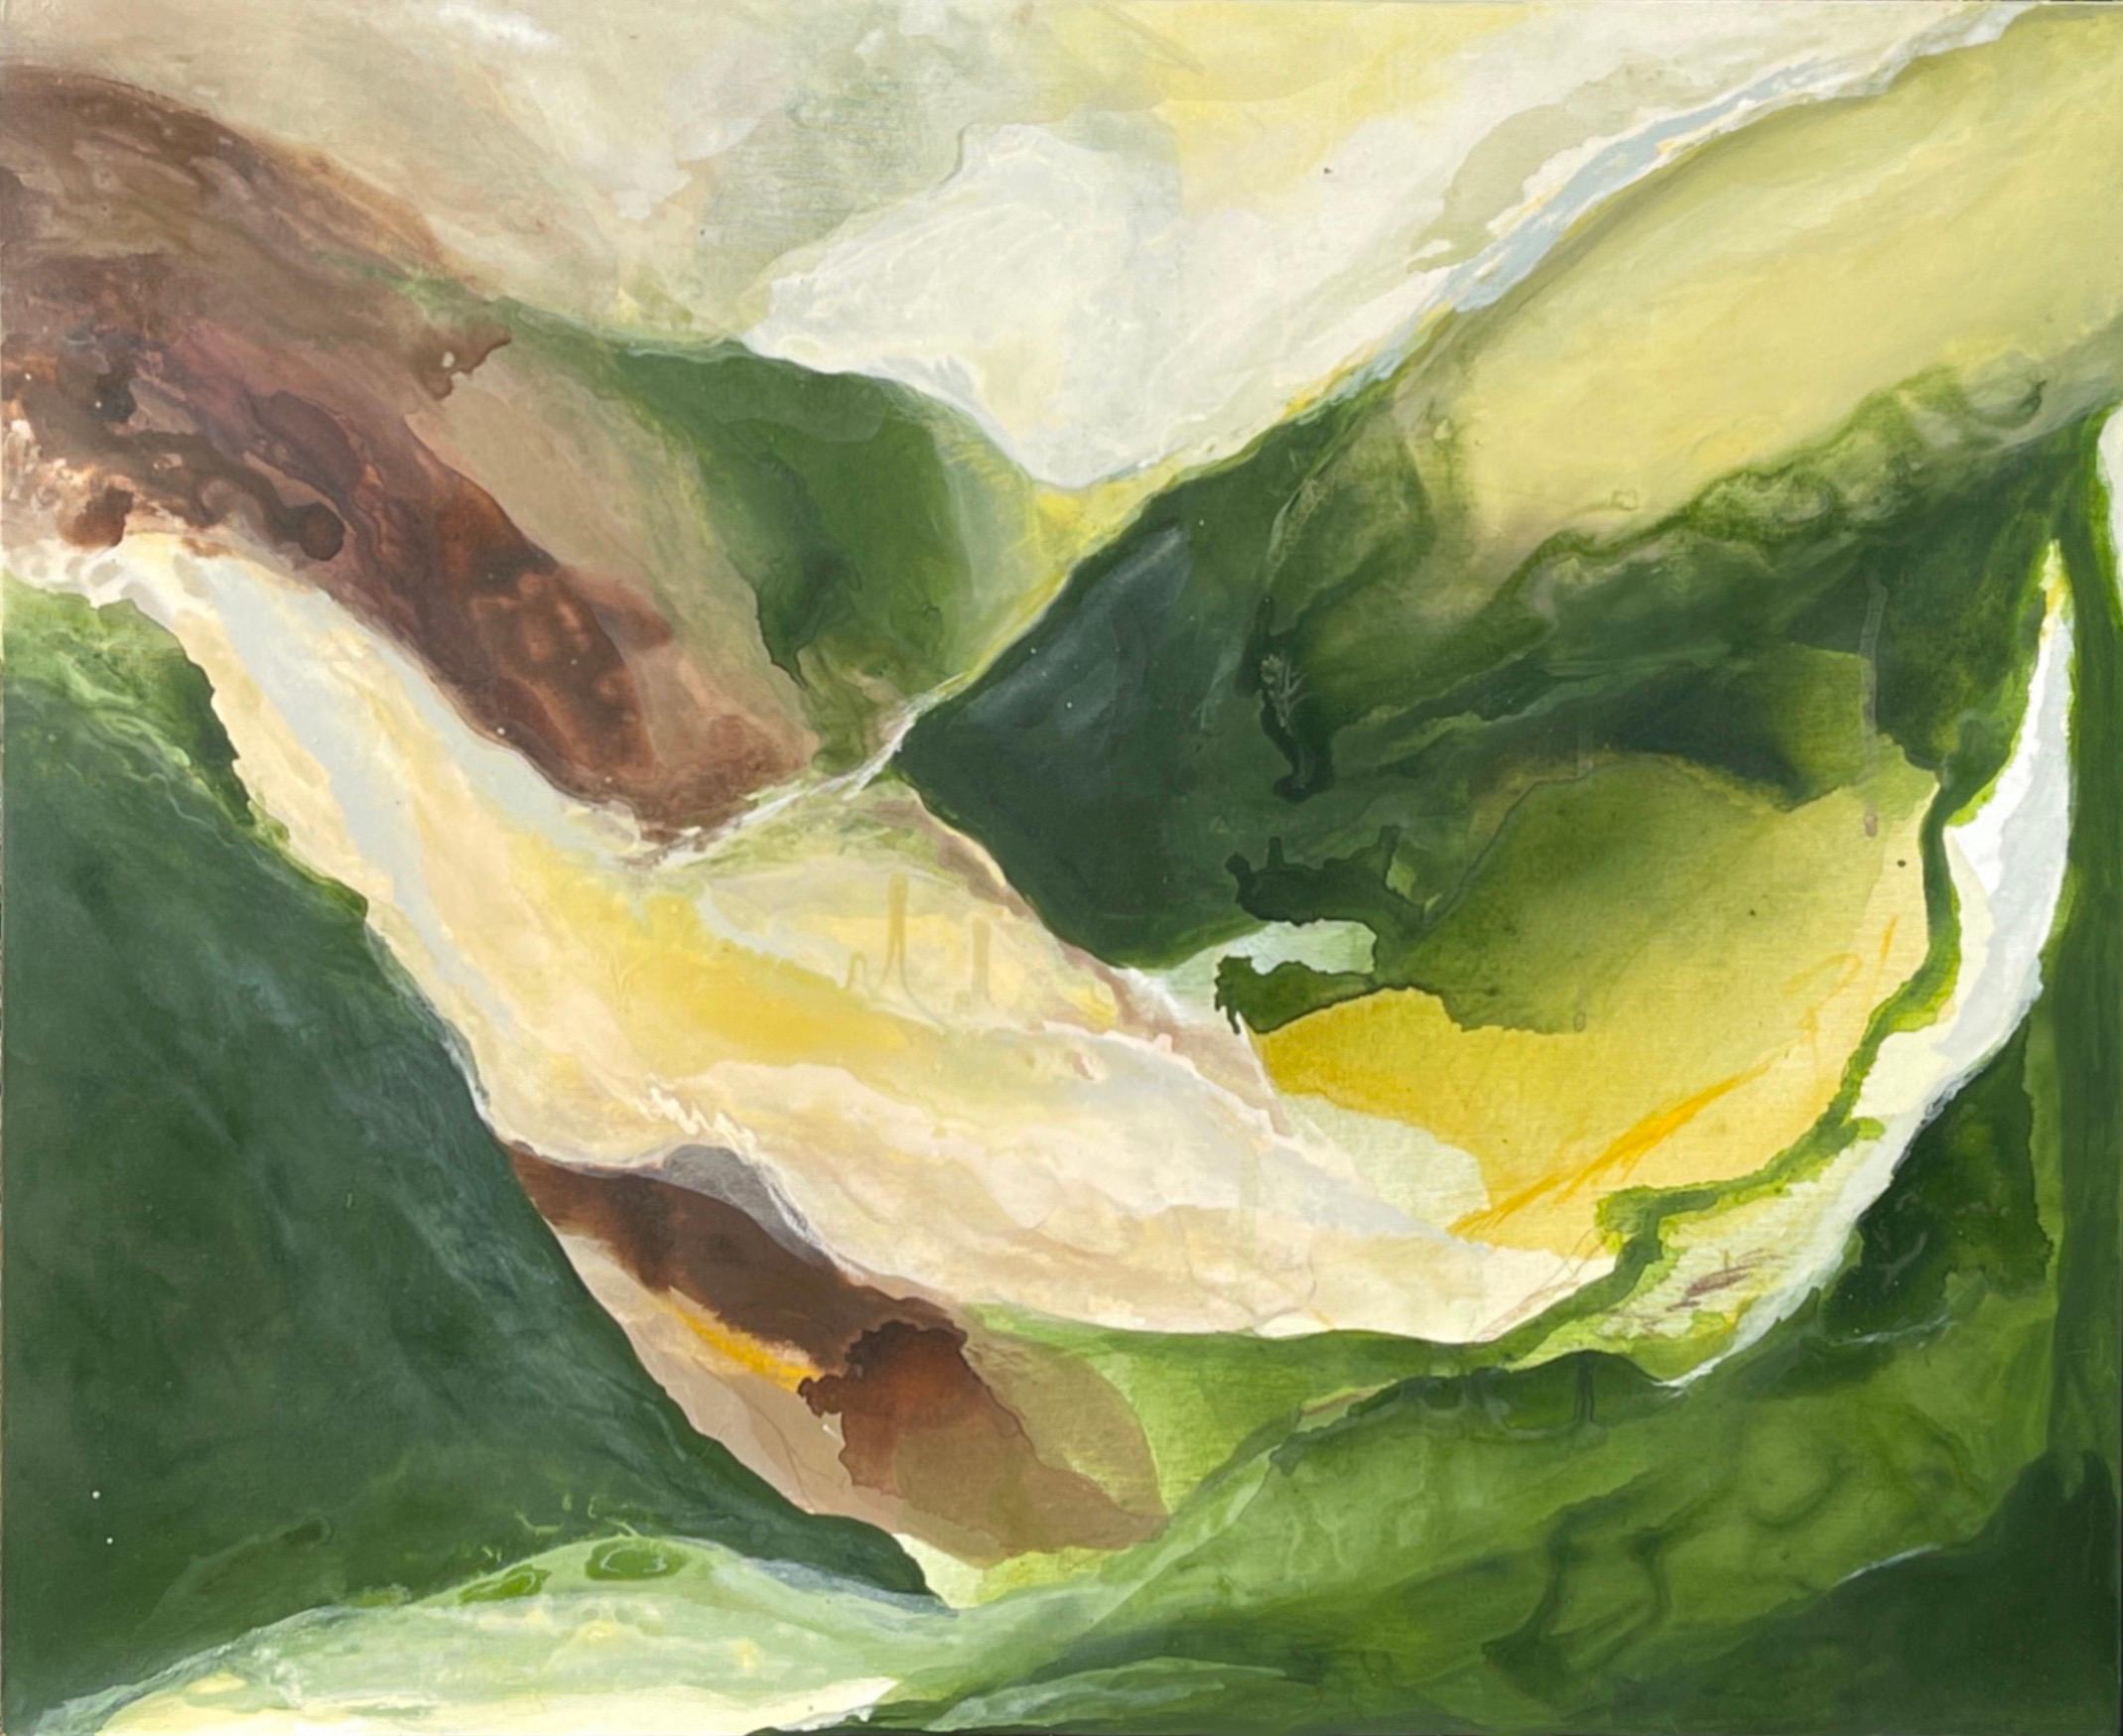 Lesia Danilina Interior Painting - "Sustainability" abstract, green, yellow, brown, nature, mountains